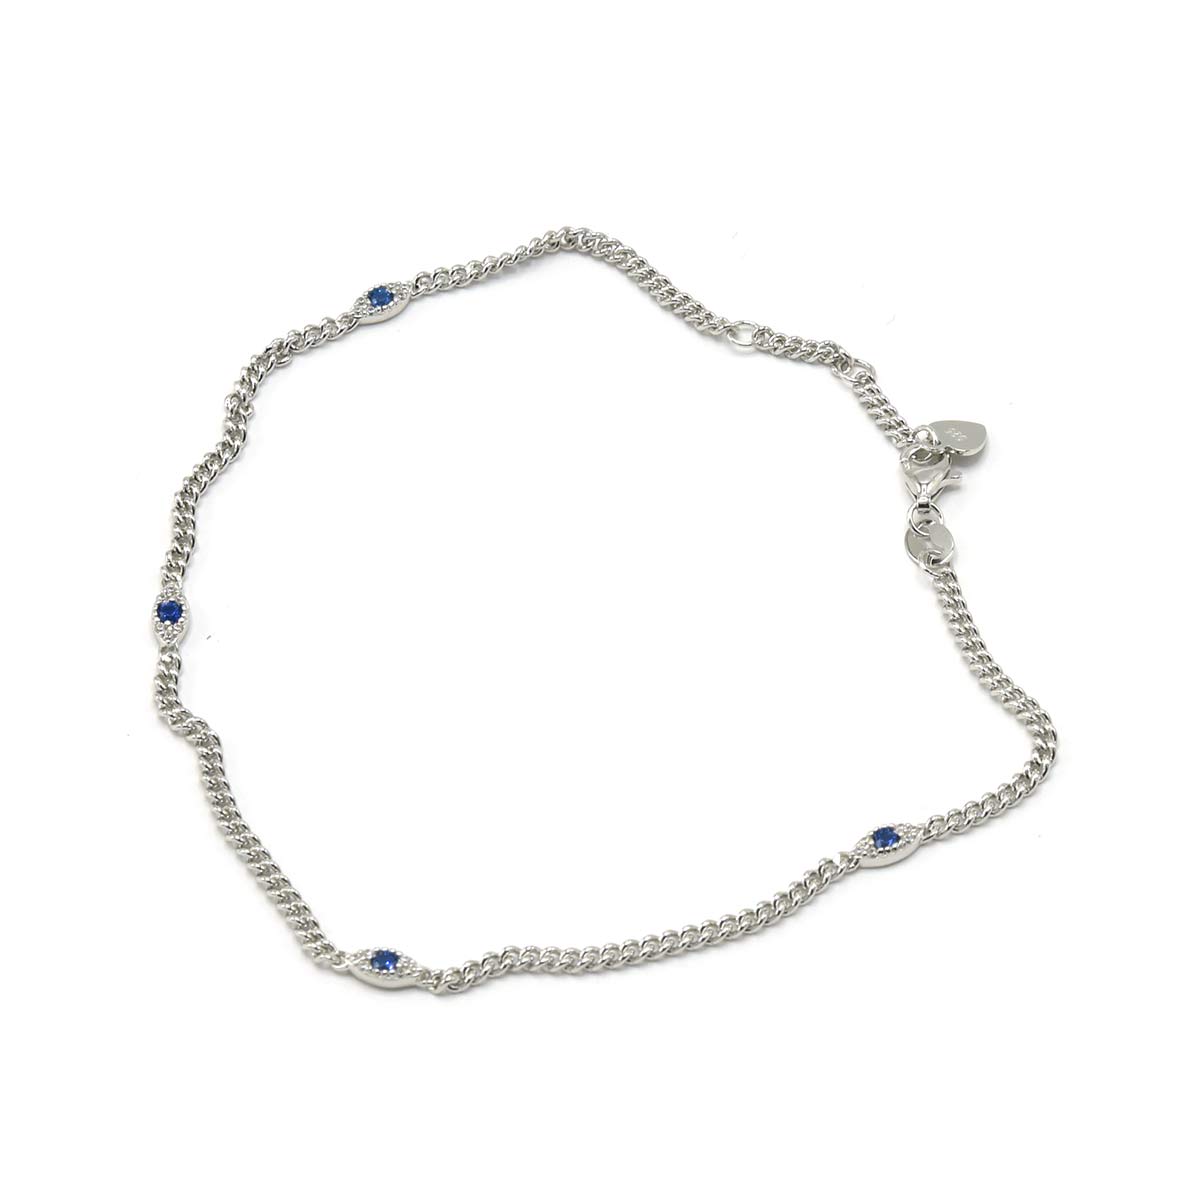 STAW-18 10 inch Anklets